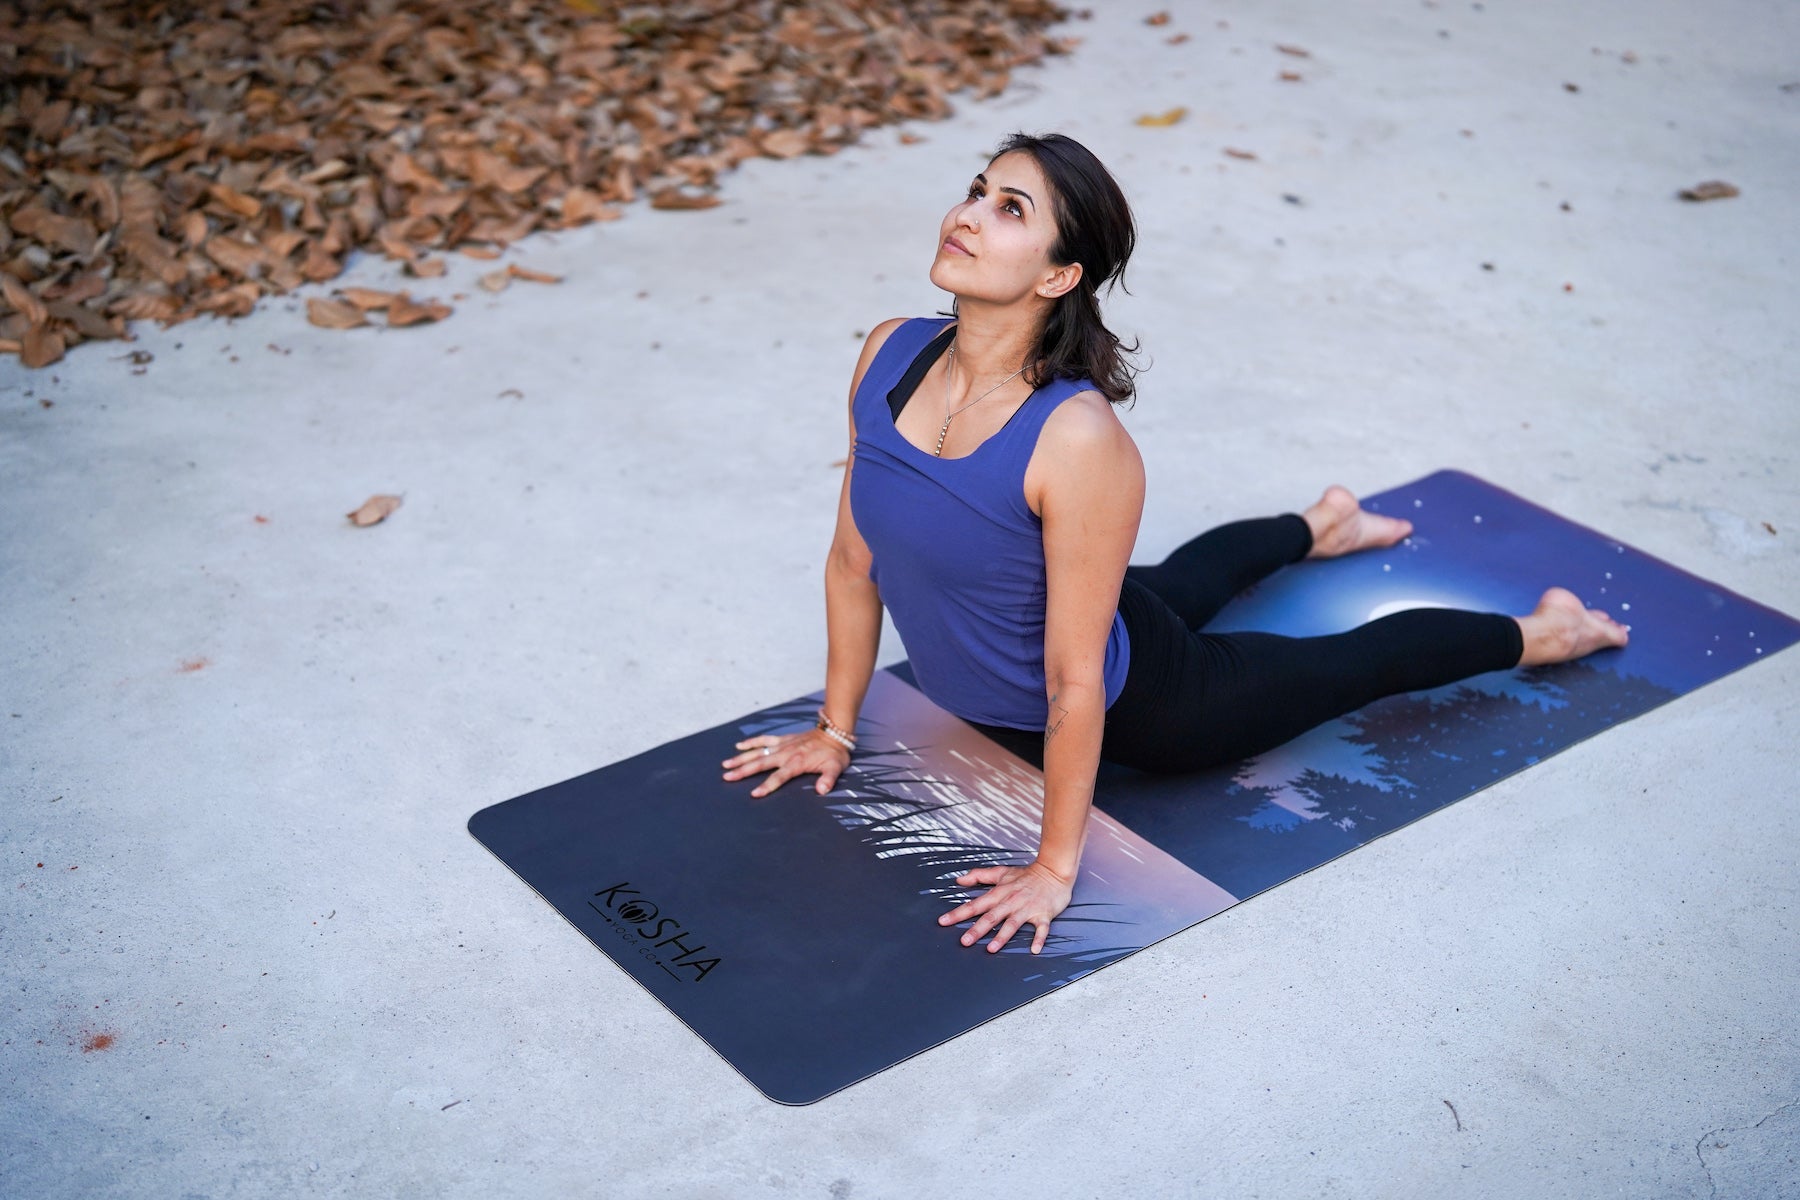 Infinity Yoga Mat - The Best Yoga Mat for Workout & Exercises